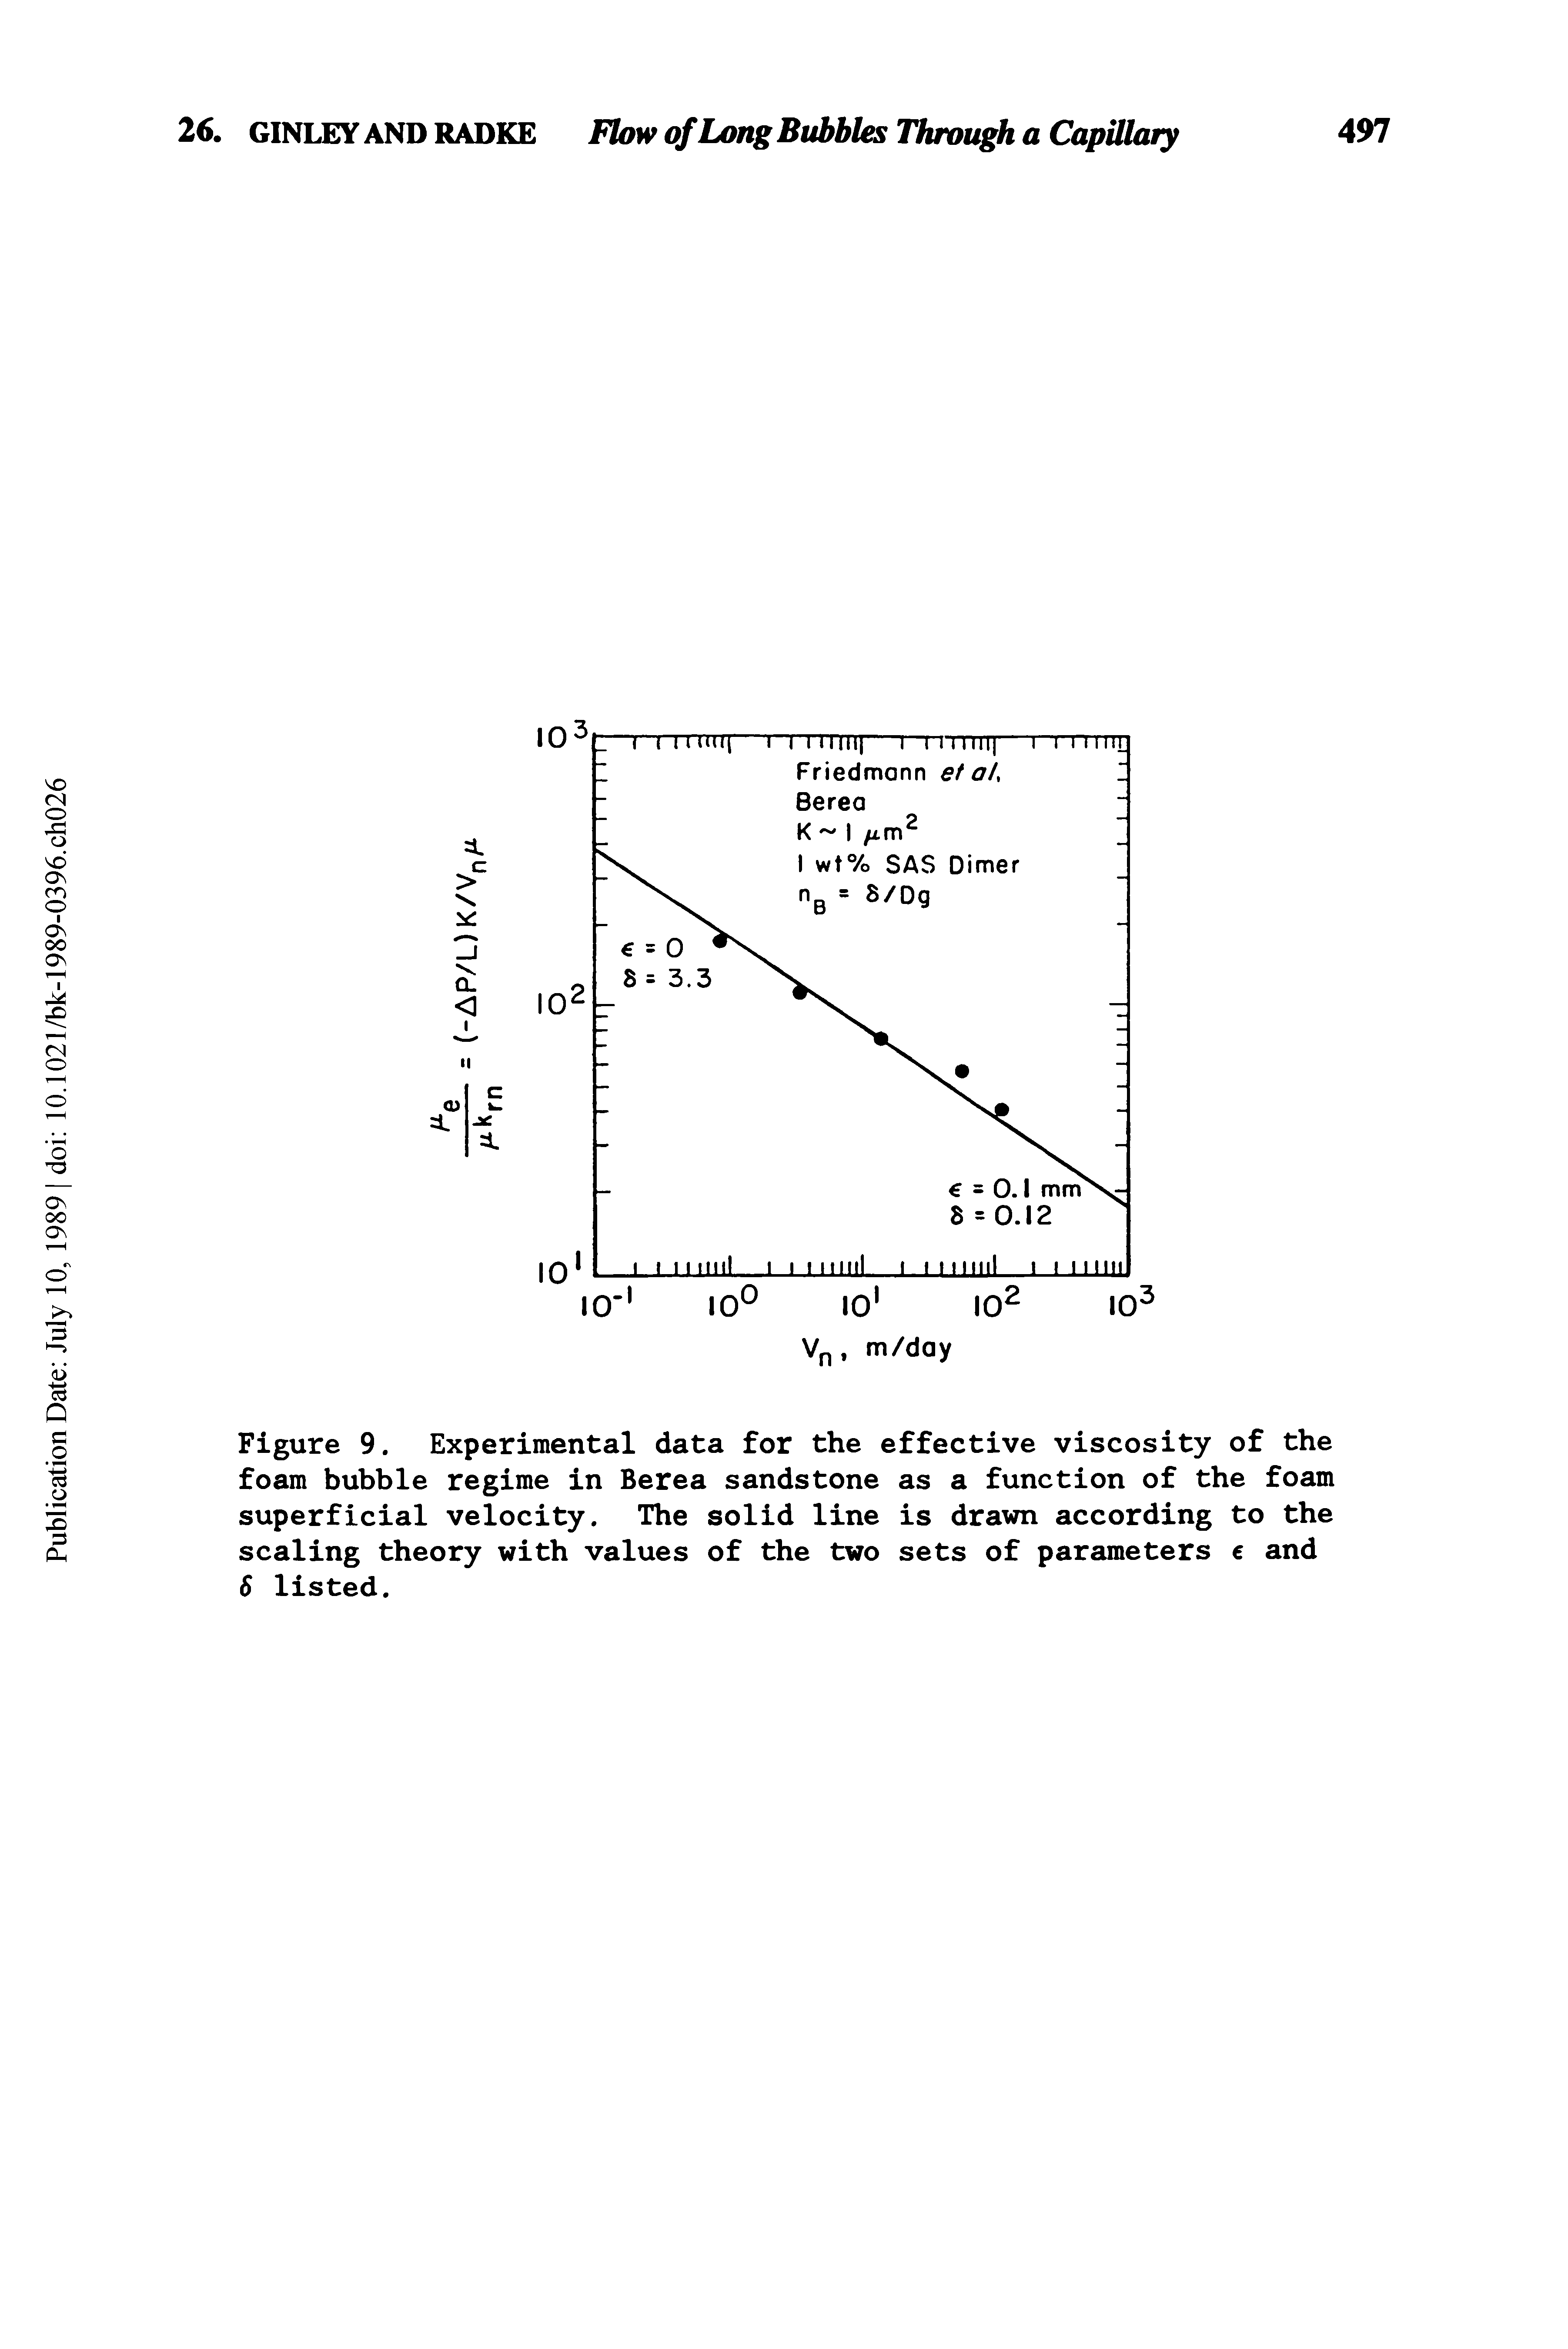 Figure 9. Experimental data for the effective viscosity of the foam bubble regime in Berea sandstone as a function of the foam superficial velocity. The solid line is drawn according to the scaling theory with values of the two sets of parameters e and 6 listed.